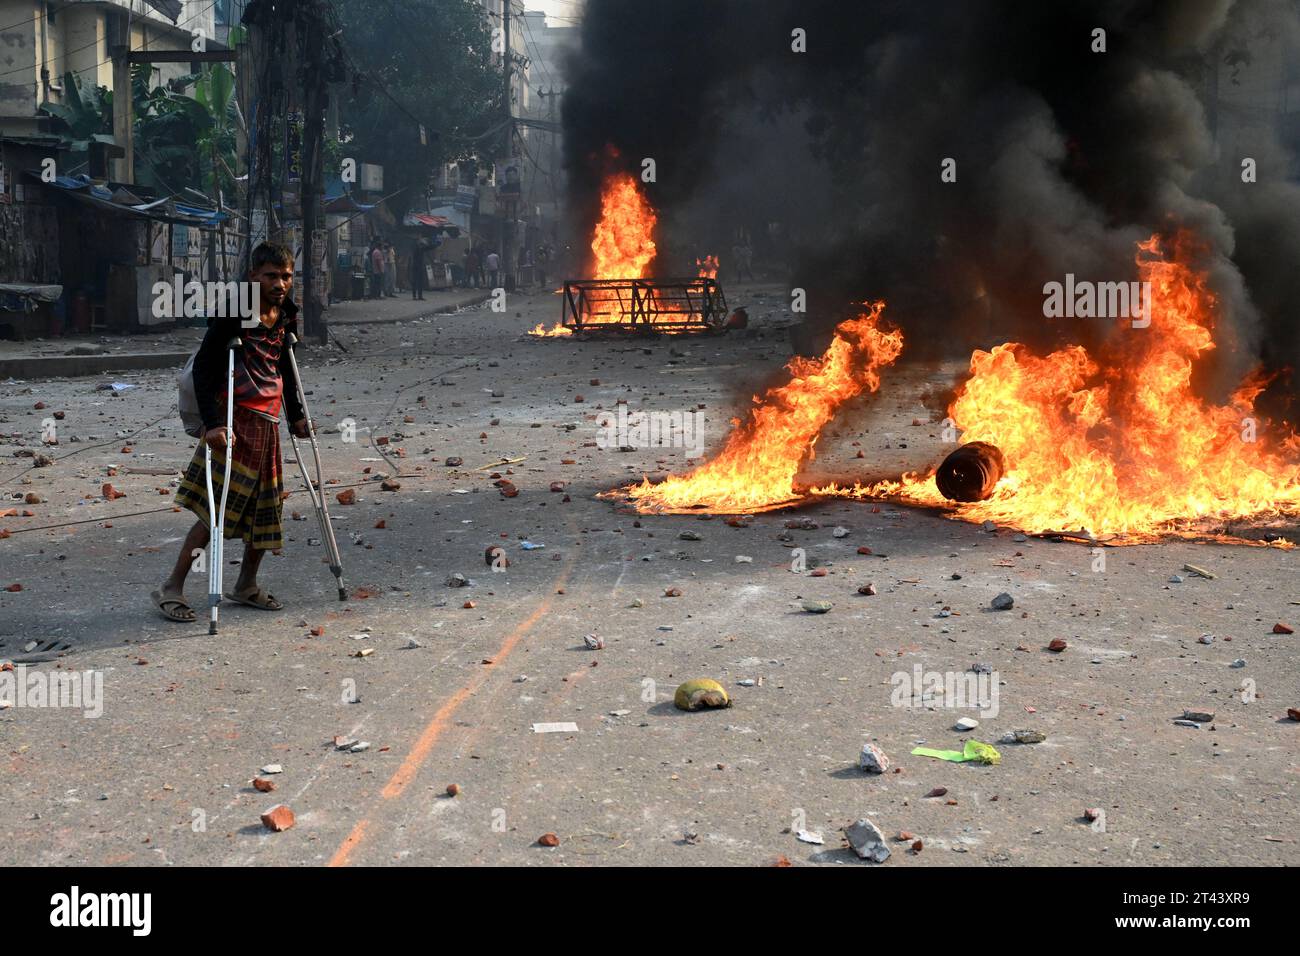 Dhaka, Bangladesh. 28th Oct 2023. Police clash with Supporters of Bangladesh Nationalist Party (BNP) during protest rally demanding the resignation of Prime Minister Sheikh Hasina and holding the next general election under a non-party caretaker government, in front of their head office in Dhaka, Bangladesh, on October 28, 2023 Credit: Mamunur Rashid/Alamy Live News Stock Photo